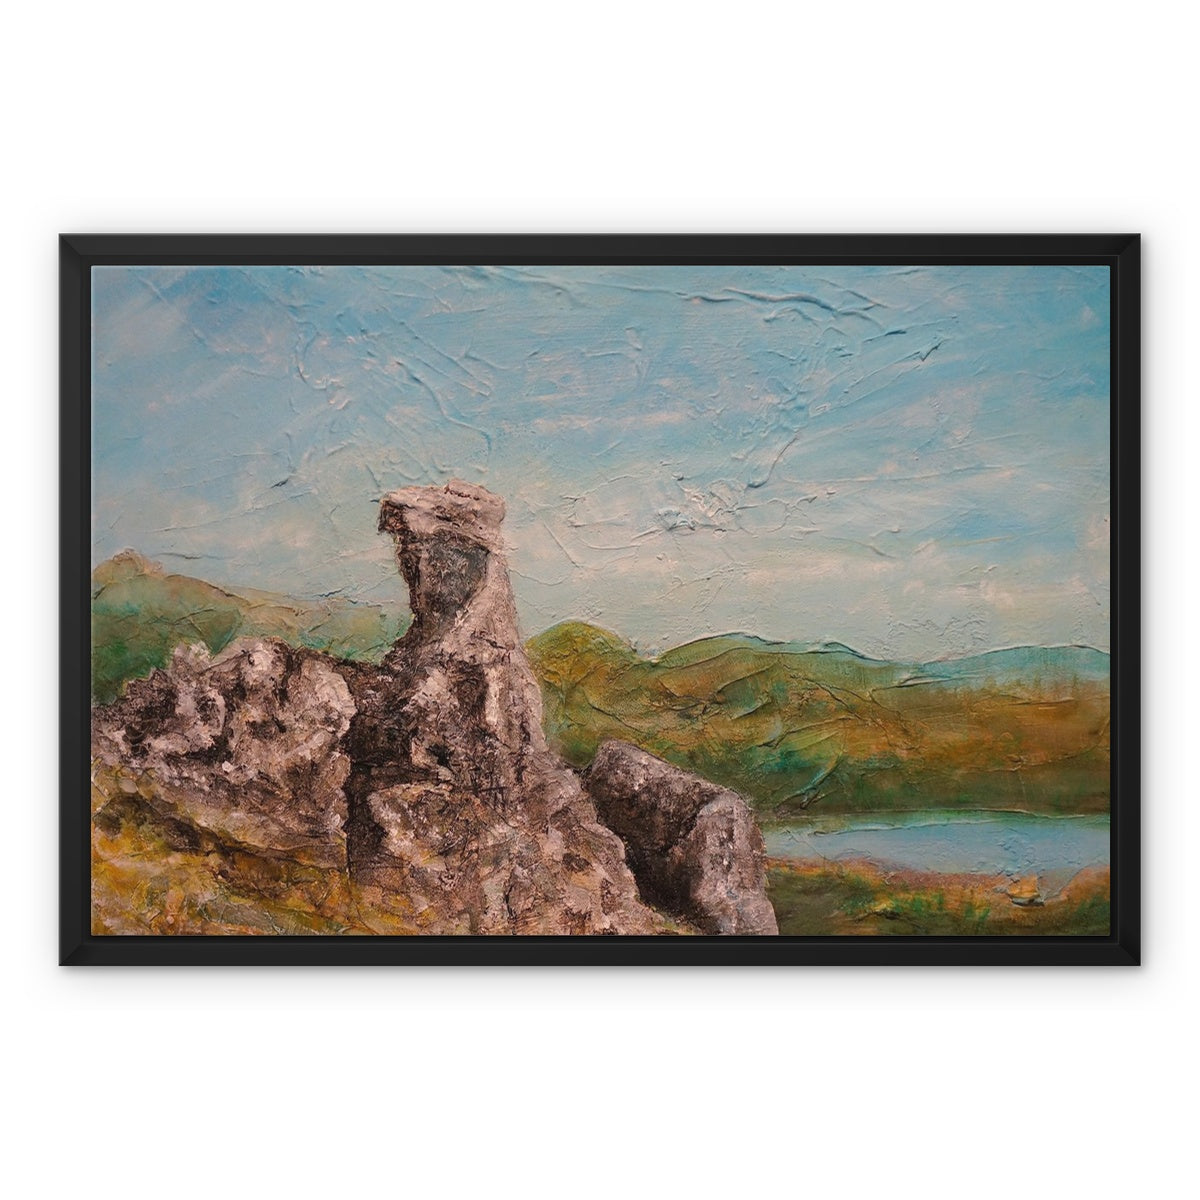 The Cobbler ii Painting | Framed Canvas From Scotland-Floating Framed Canvas Prints-Scottish Lochs & Mountains Art Gallery-24"x18"-Black Frame-Paintings, Prints, Homeware, Art Gifts From Scotland By Scottish Artist Kevin Hunter